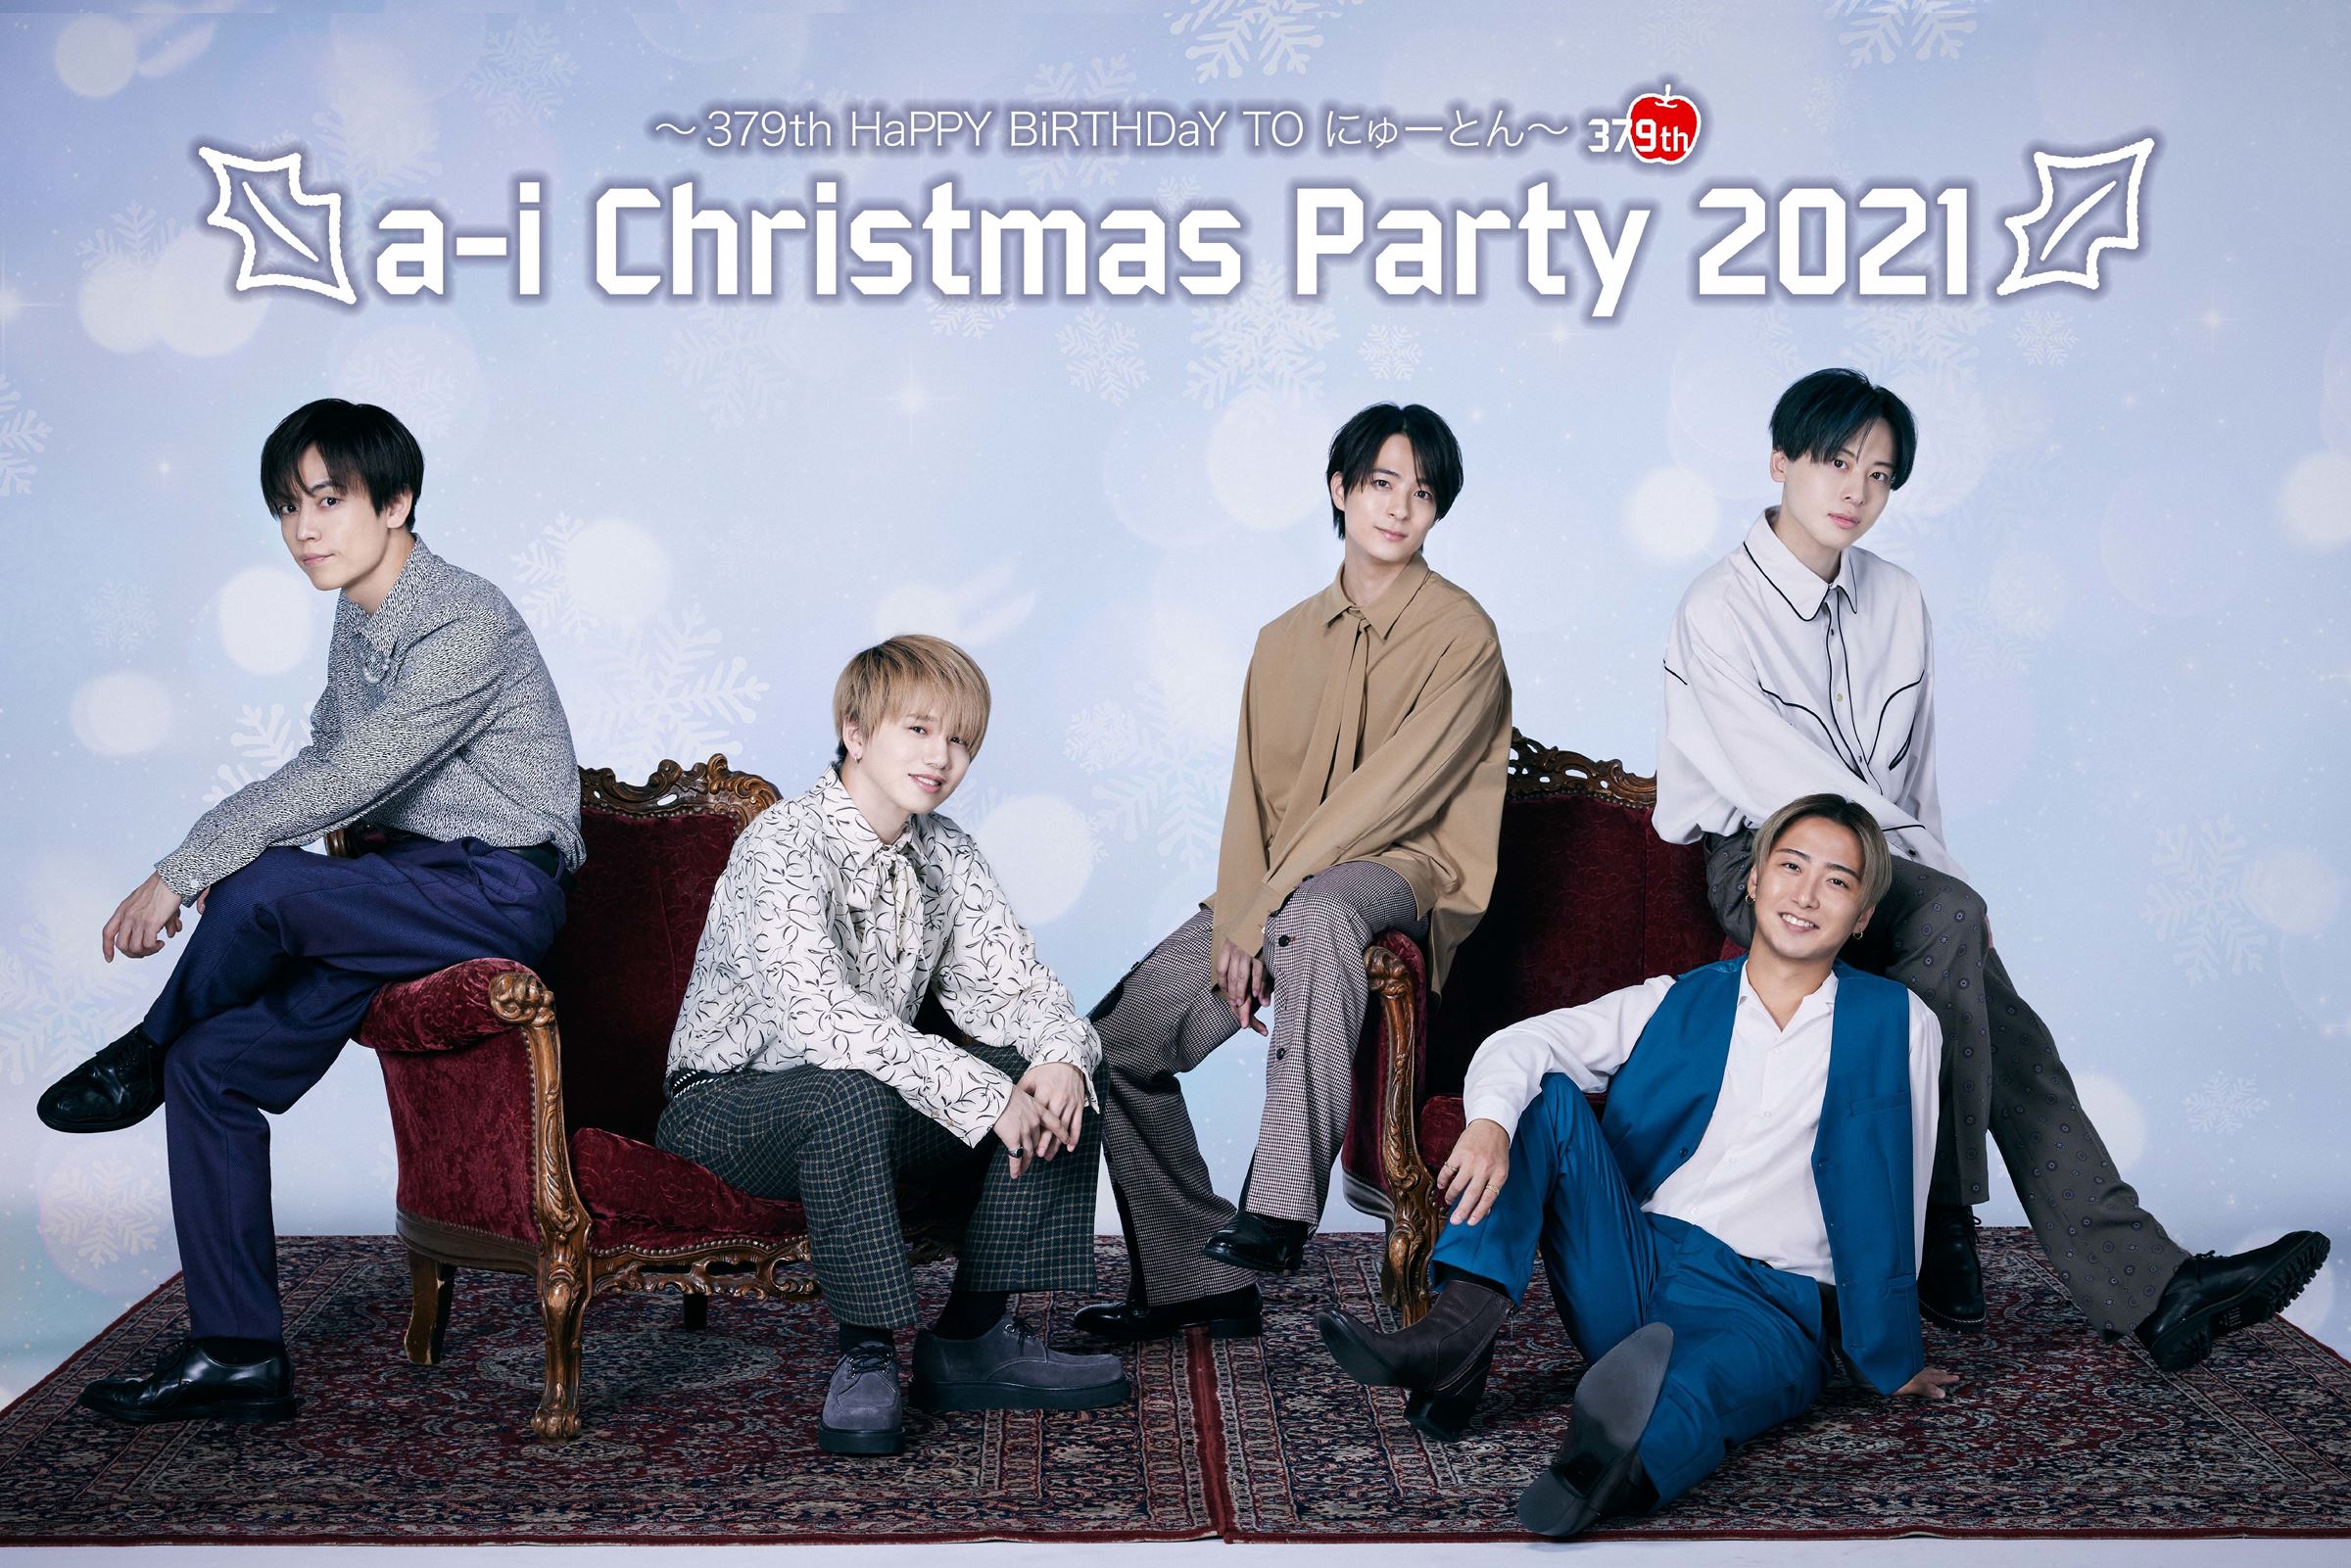 『a-i Christmas Party 2021～379th HaPPY BiRTHDaY TO にゅーとん～』メインビジュアル